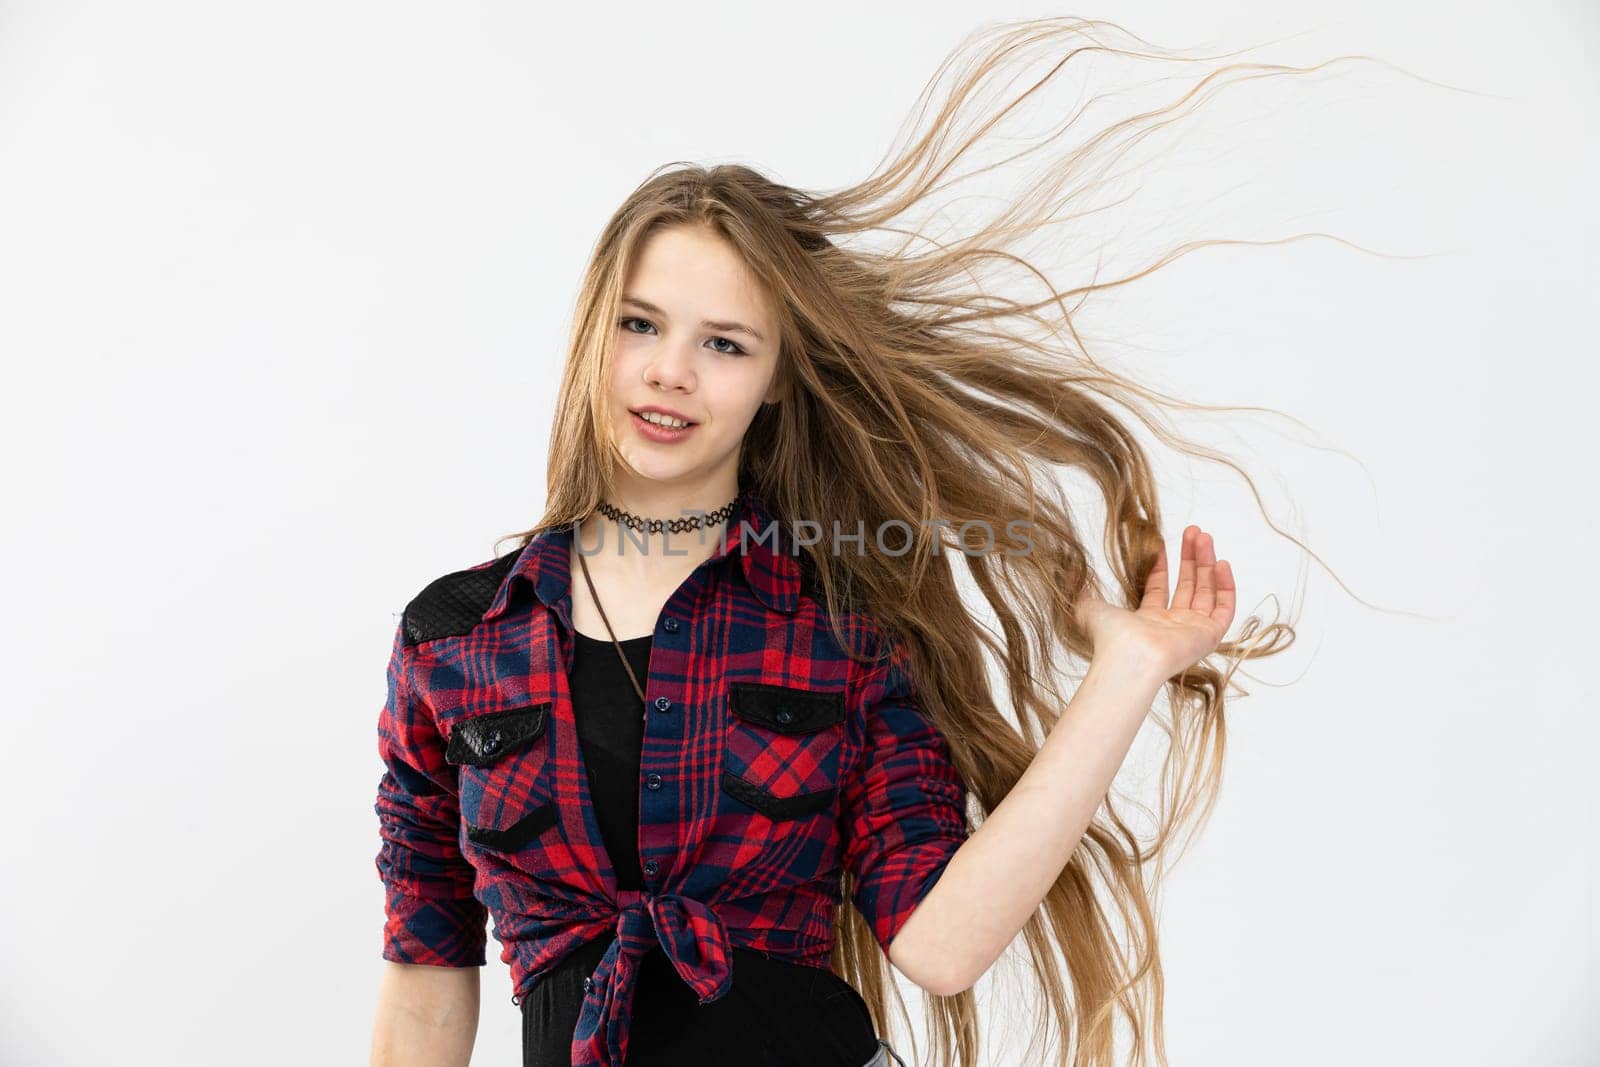 A girl in a youthful outfit poses for a photo against a white background. She is combing her fingers through her long, flowing hair. The woman is wearing a red and blue checked shirt.